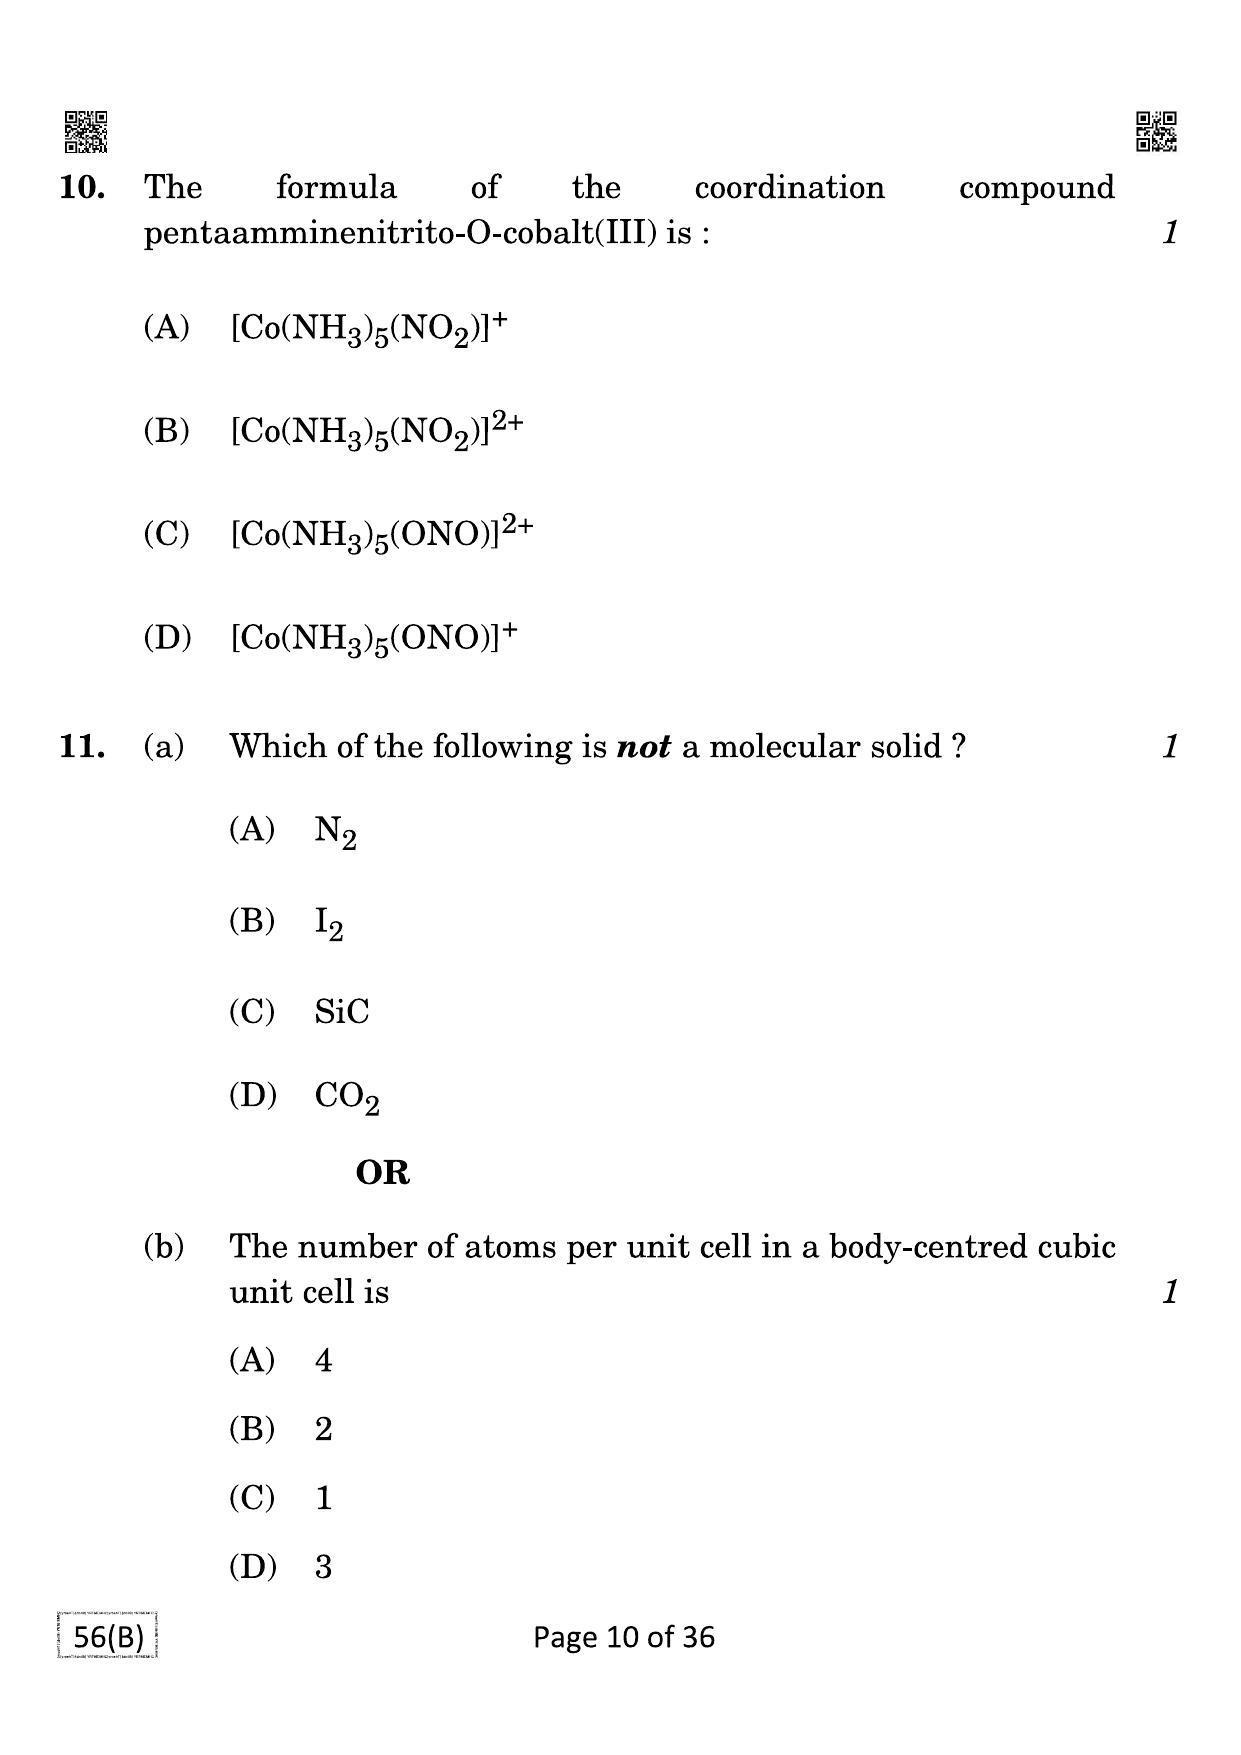 CBSE Class 12 QP_043_CHEMISTRY_FOR_BLIND_CANDIDATES 2021 Compartment Question Paper - Page 10